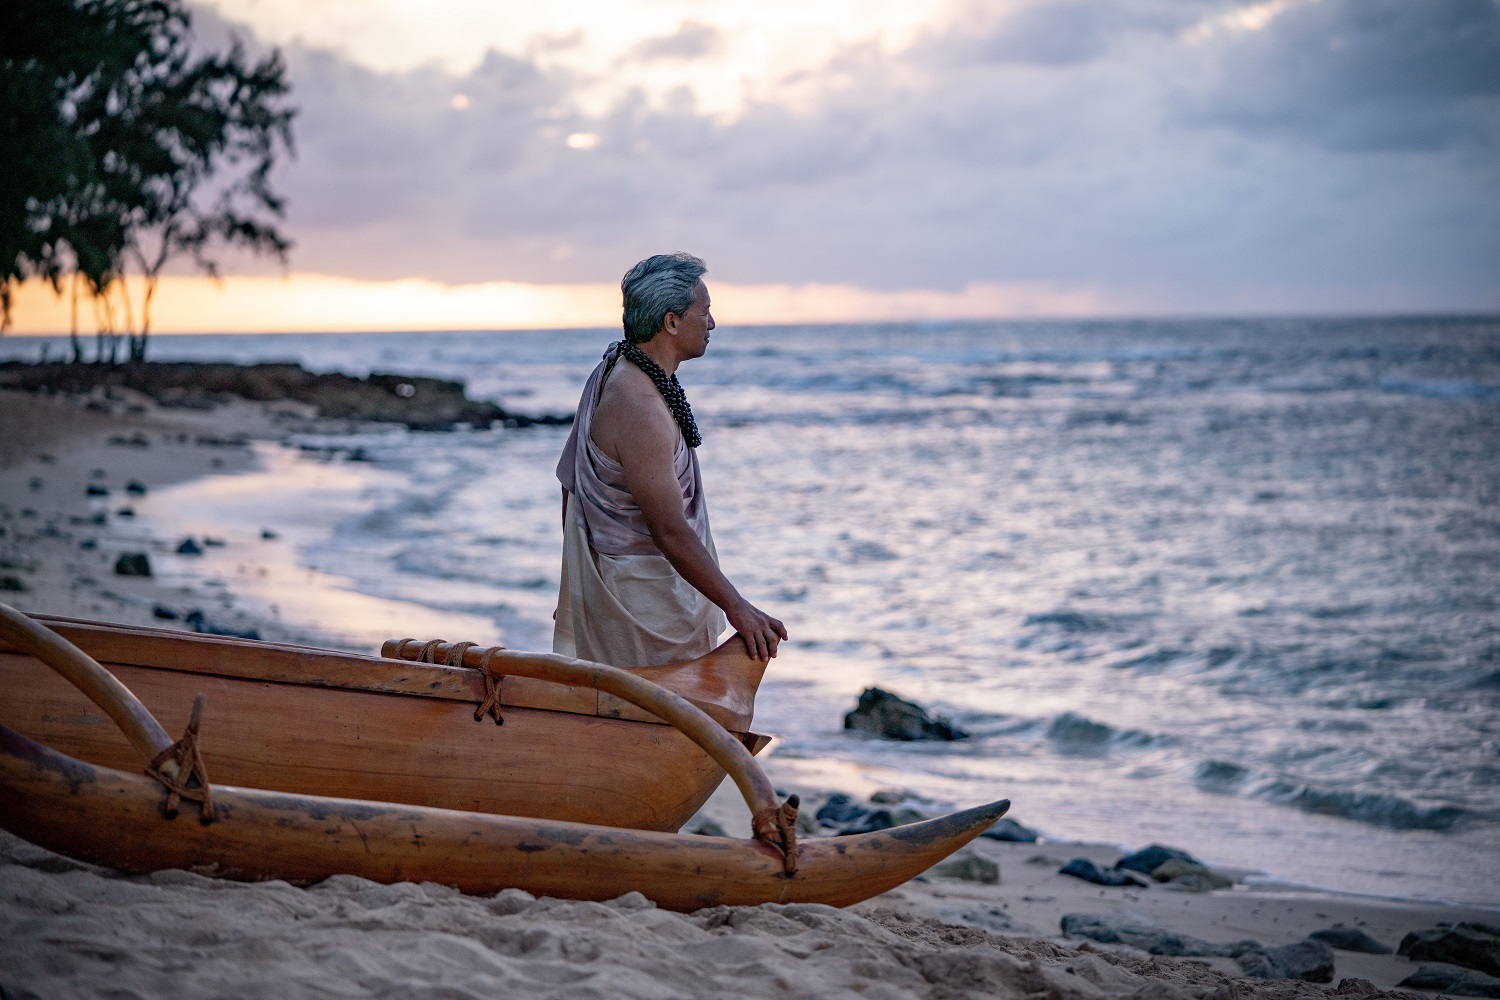 image showcases the connection Hawaiians feel between their culture and the sea.